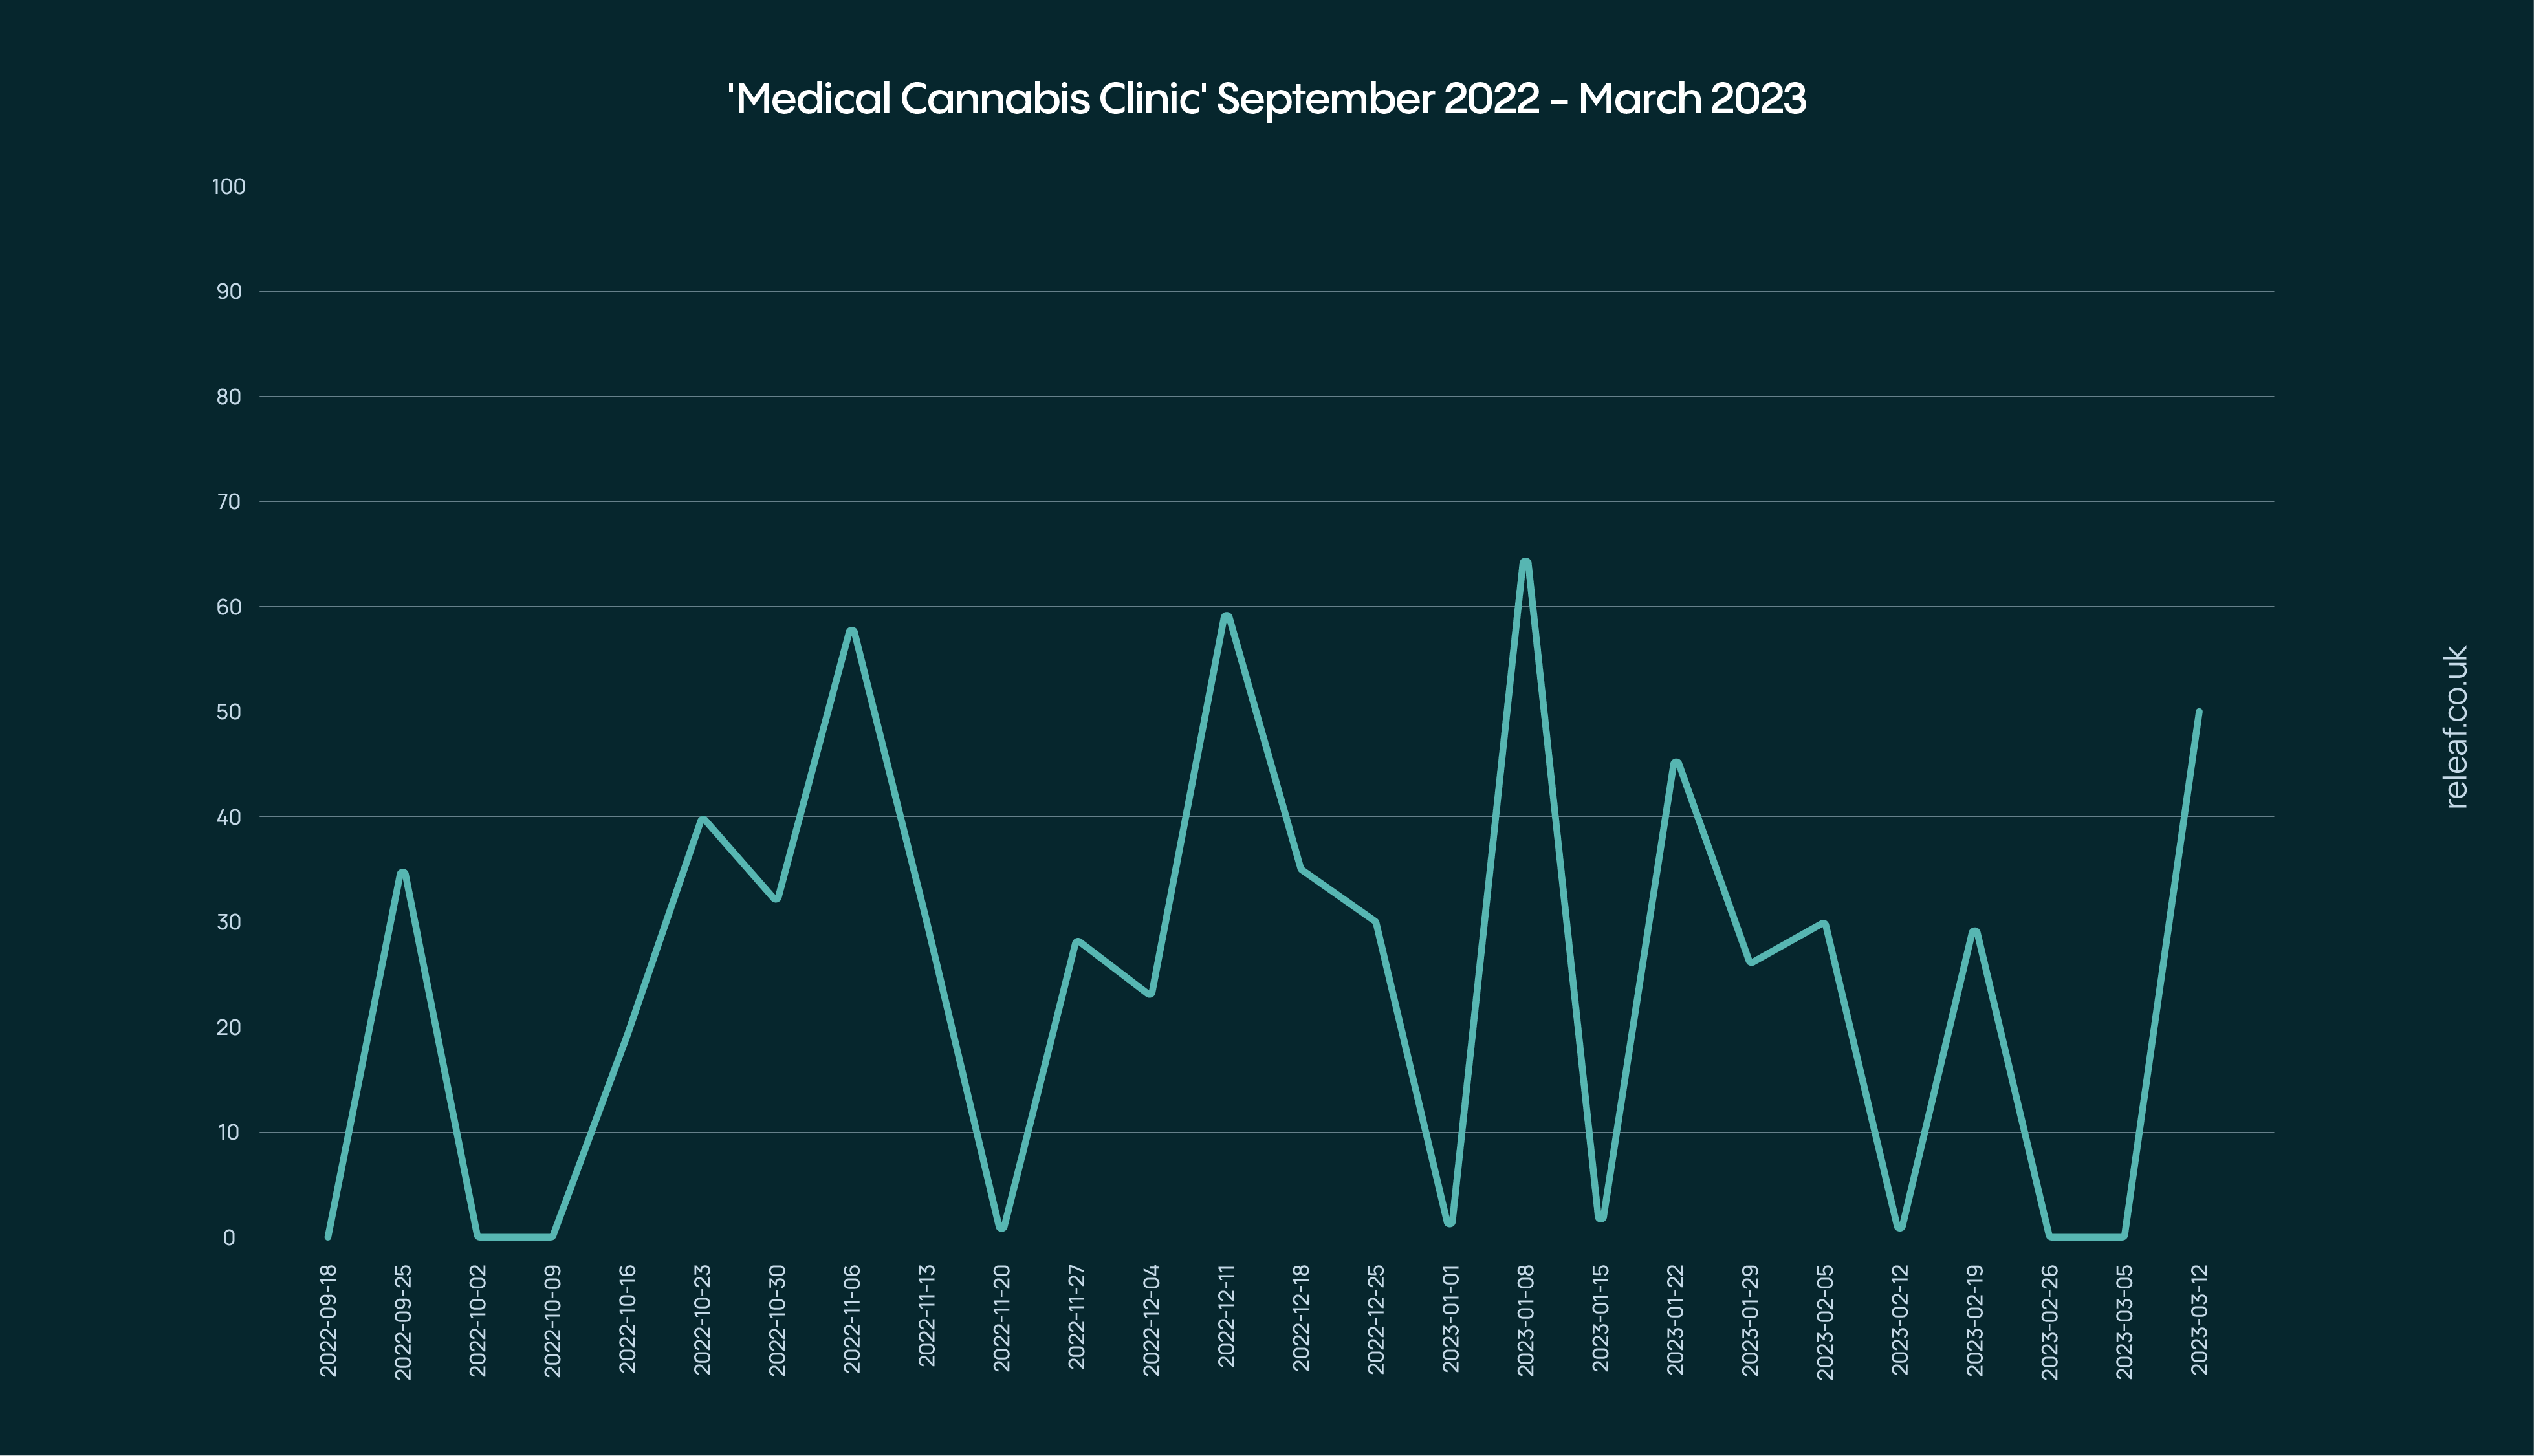 medical cannabis clinic search demand september 2022 to march 2023